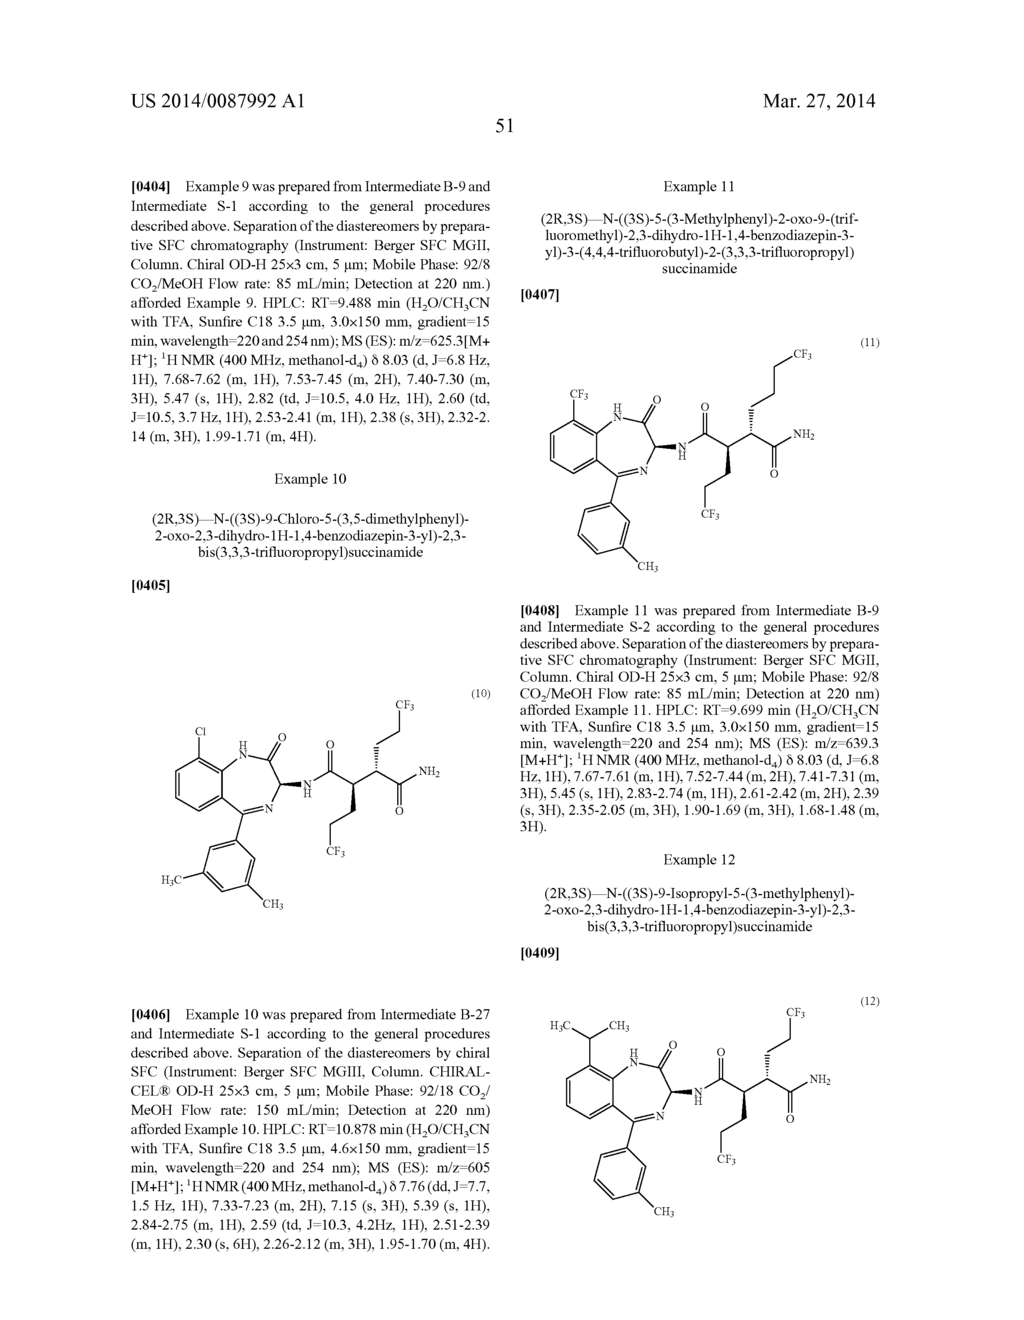 BIS(FLUOROALKYL)-1,4-BENZODIAZEPINONE COMPOUNDS AND PRODRUGS THEREOF - diagram, schematic, and image 58